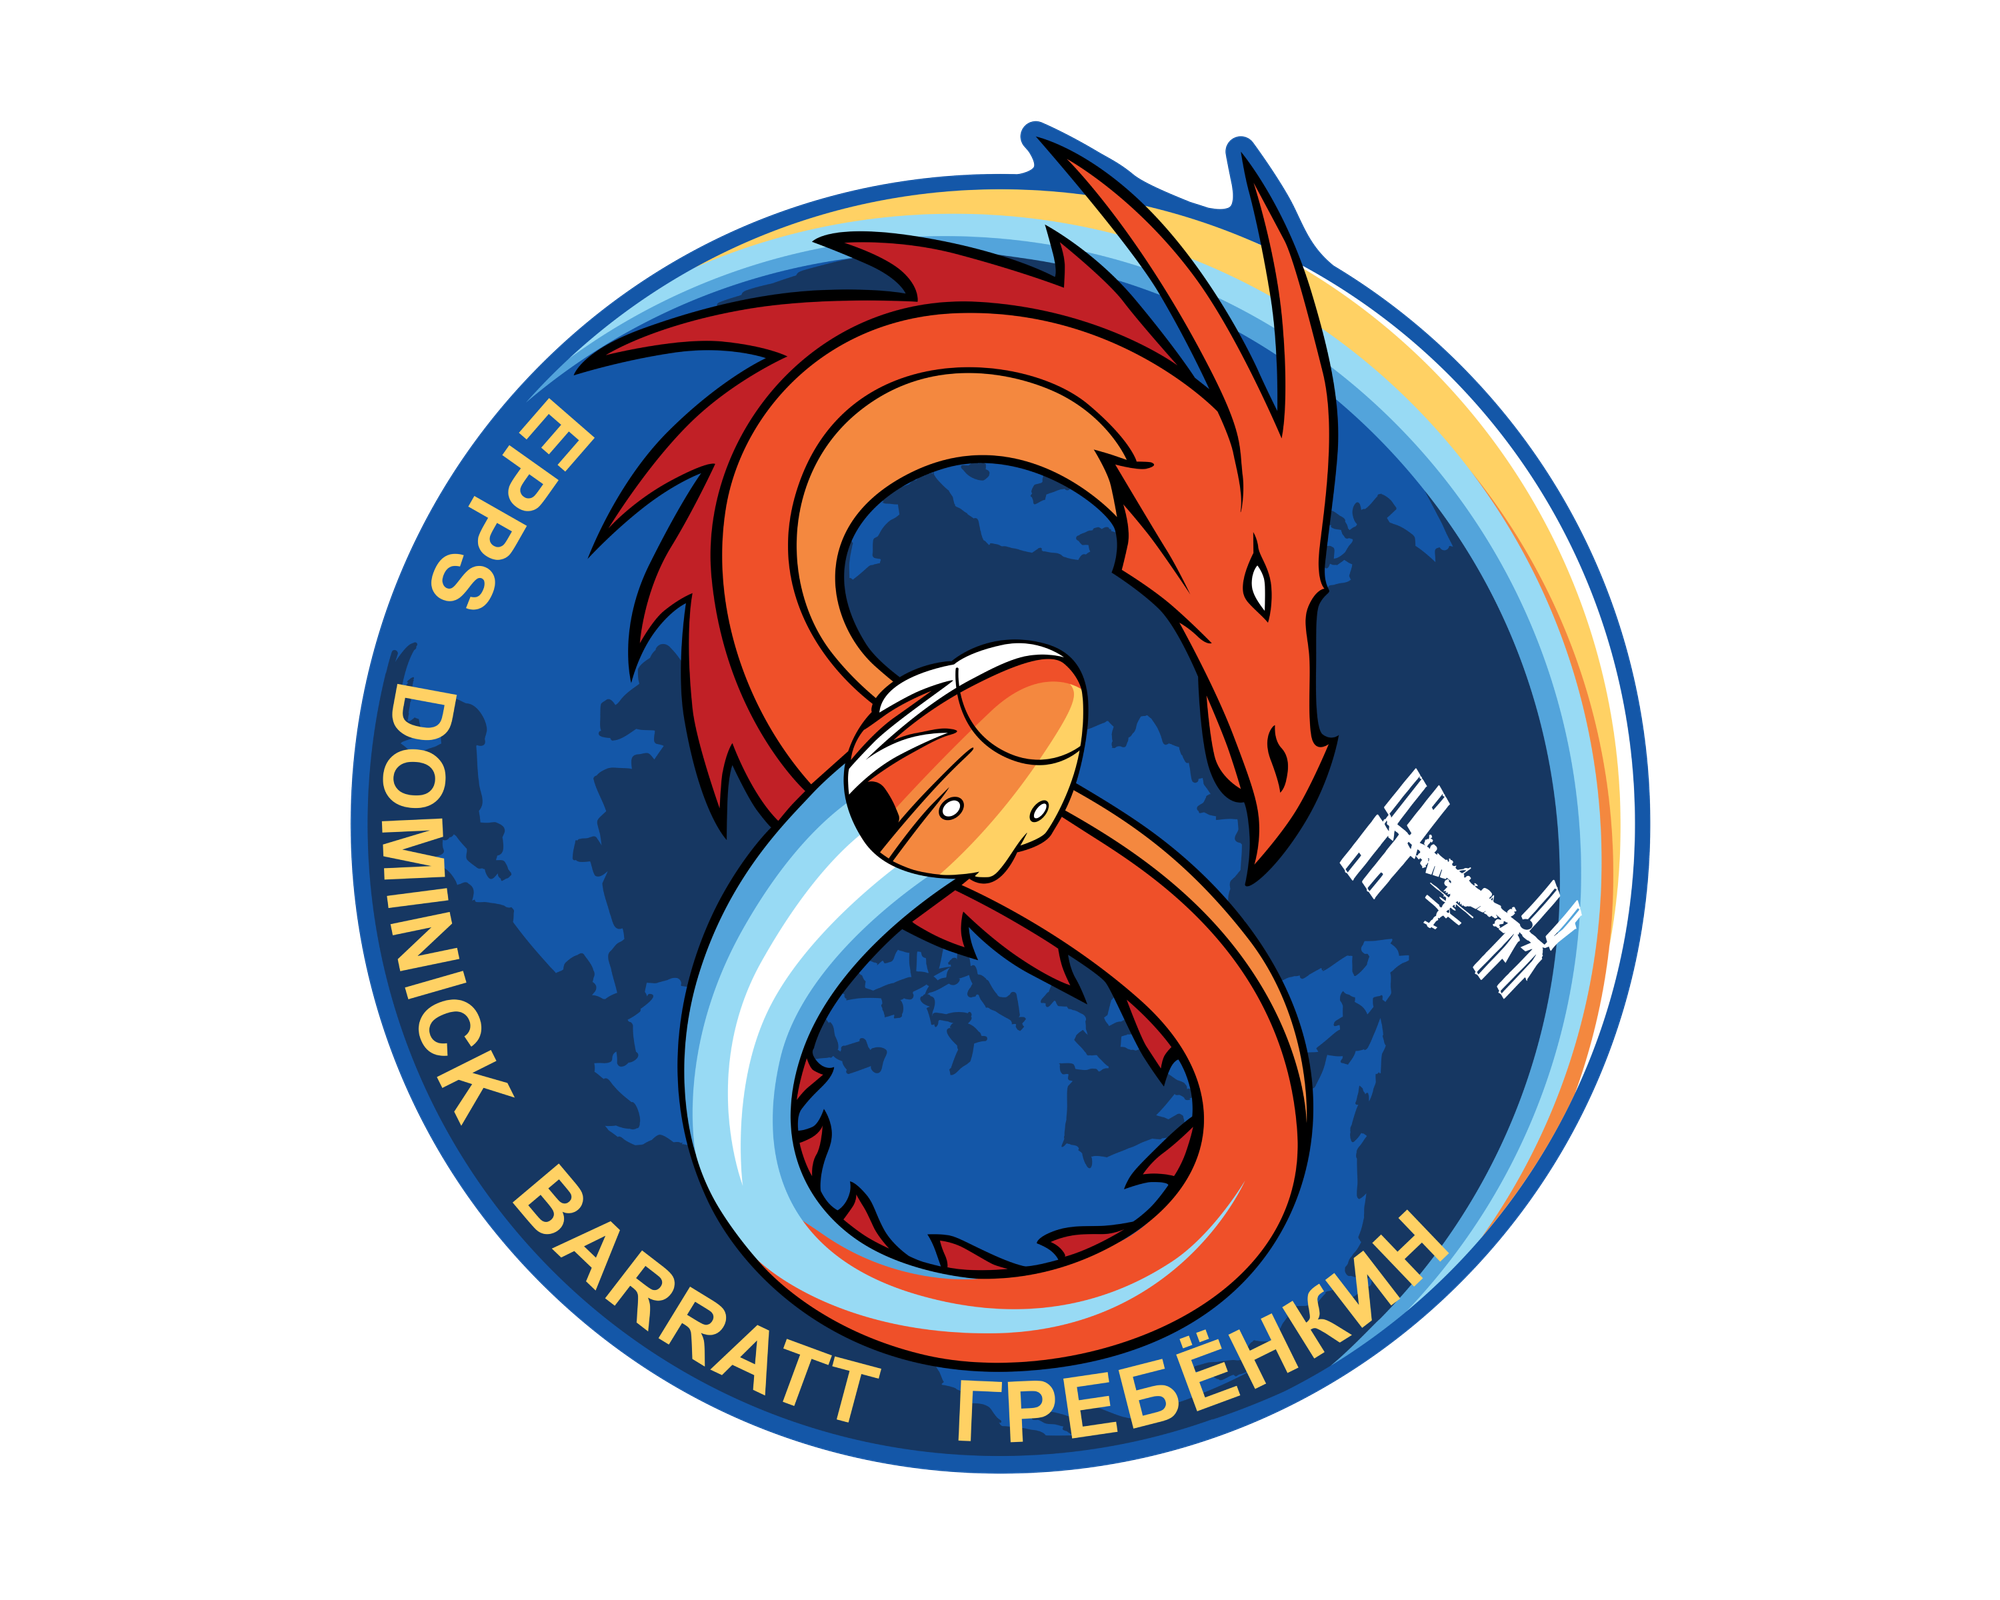 The mission patch for the Crew-8 mission. ©NASA